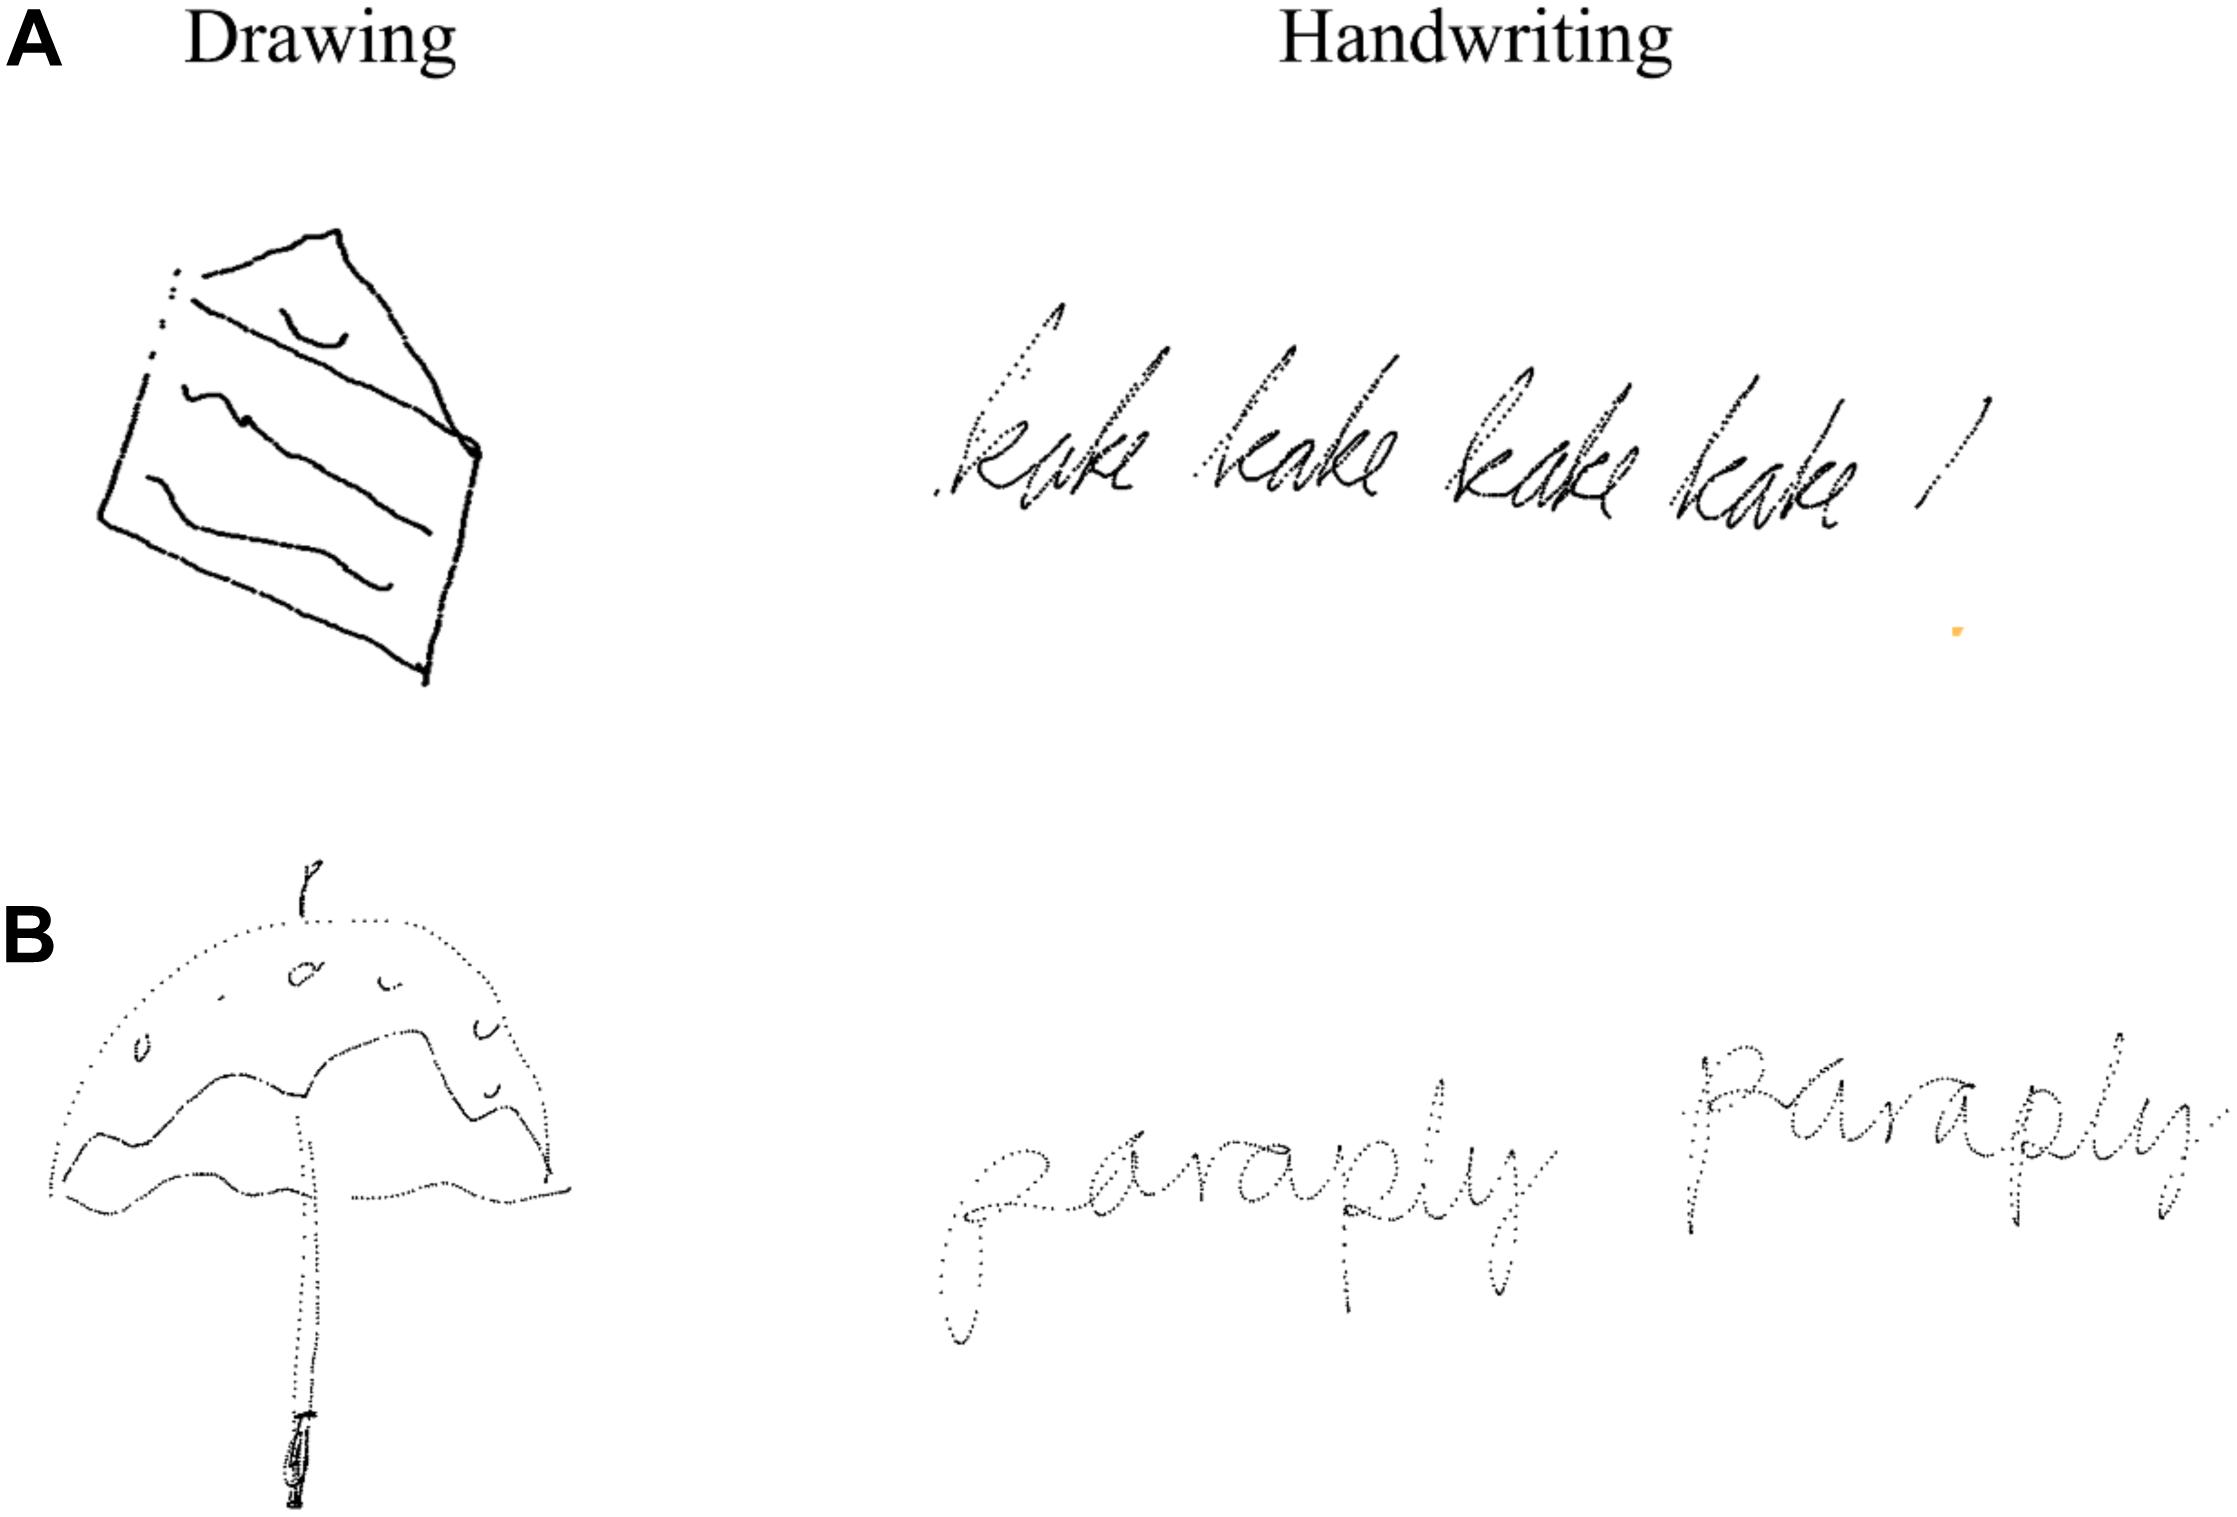 Handwriting examiners in the digital age